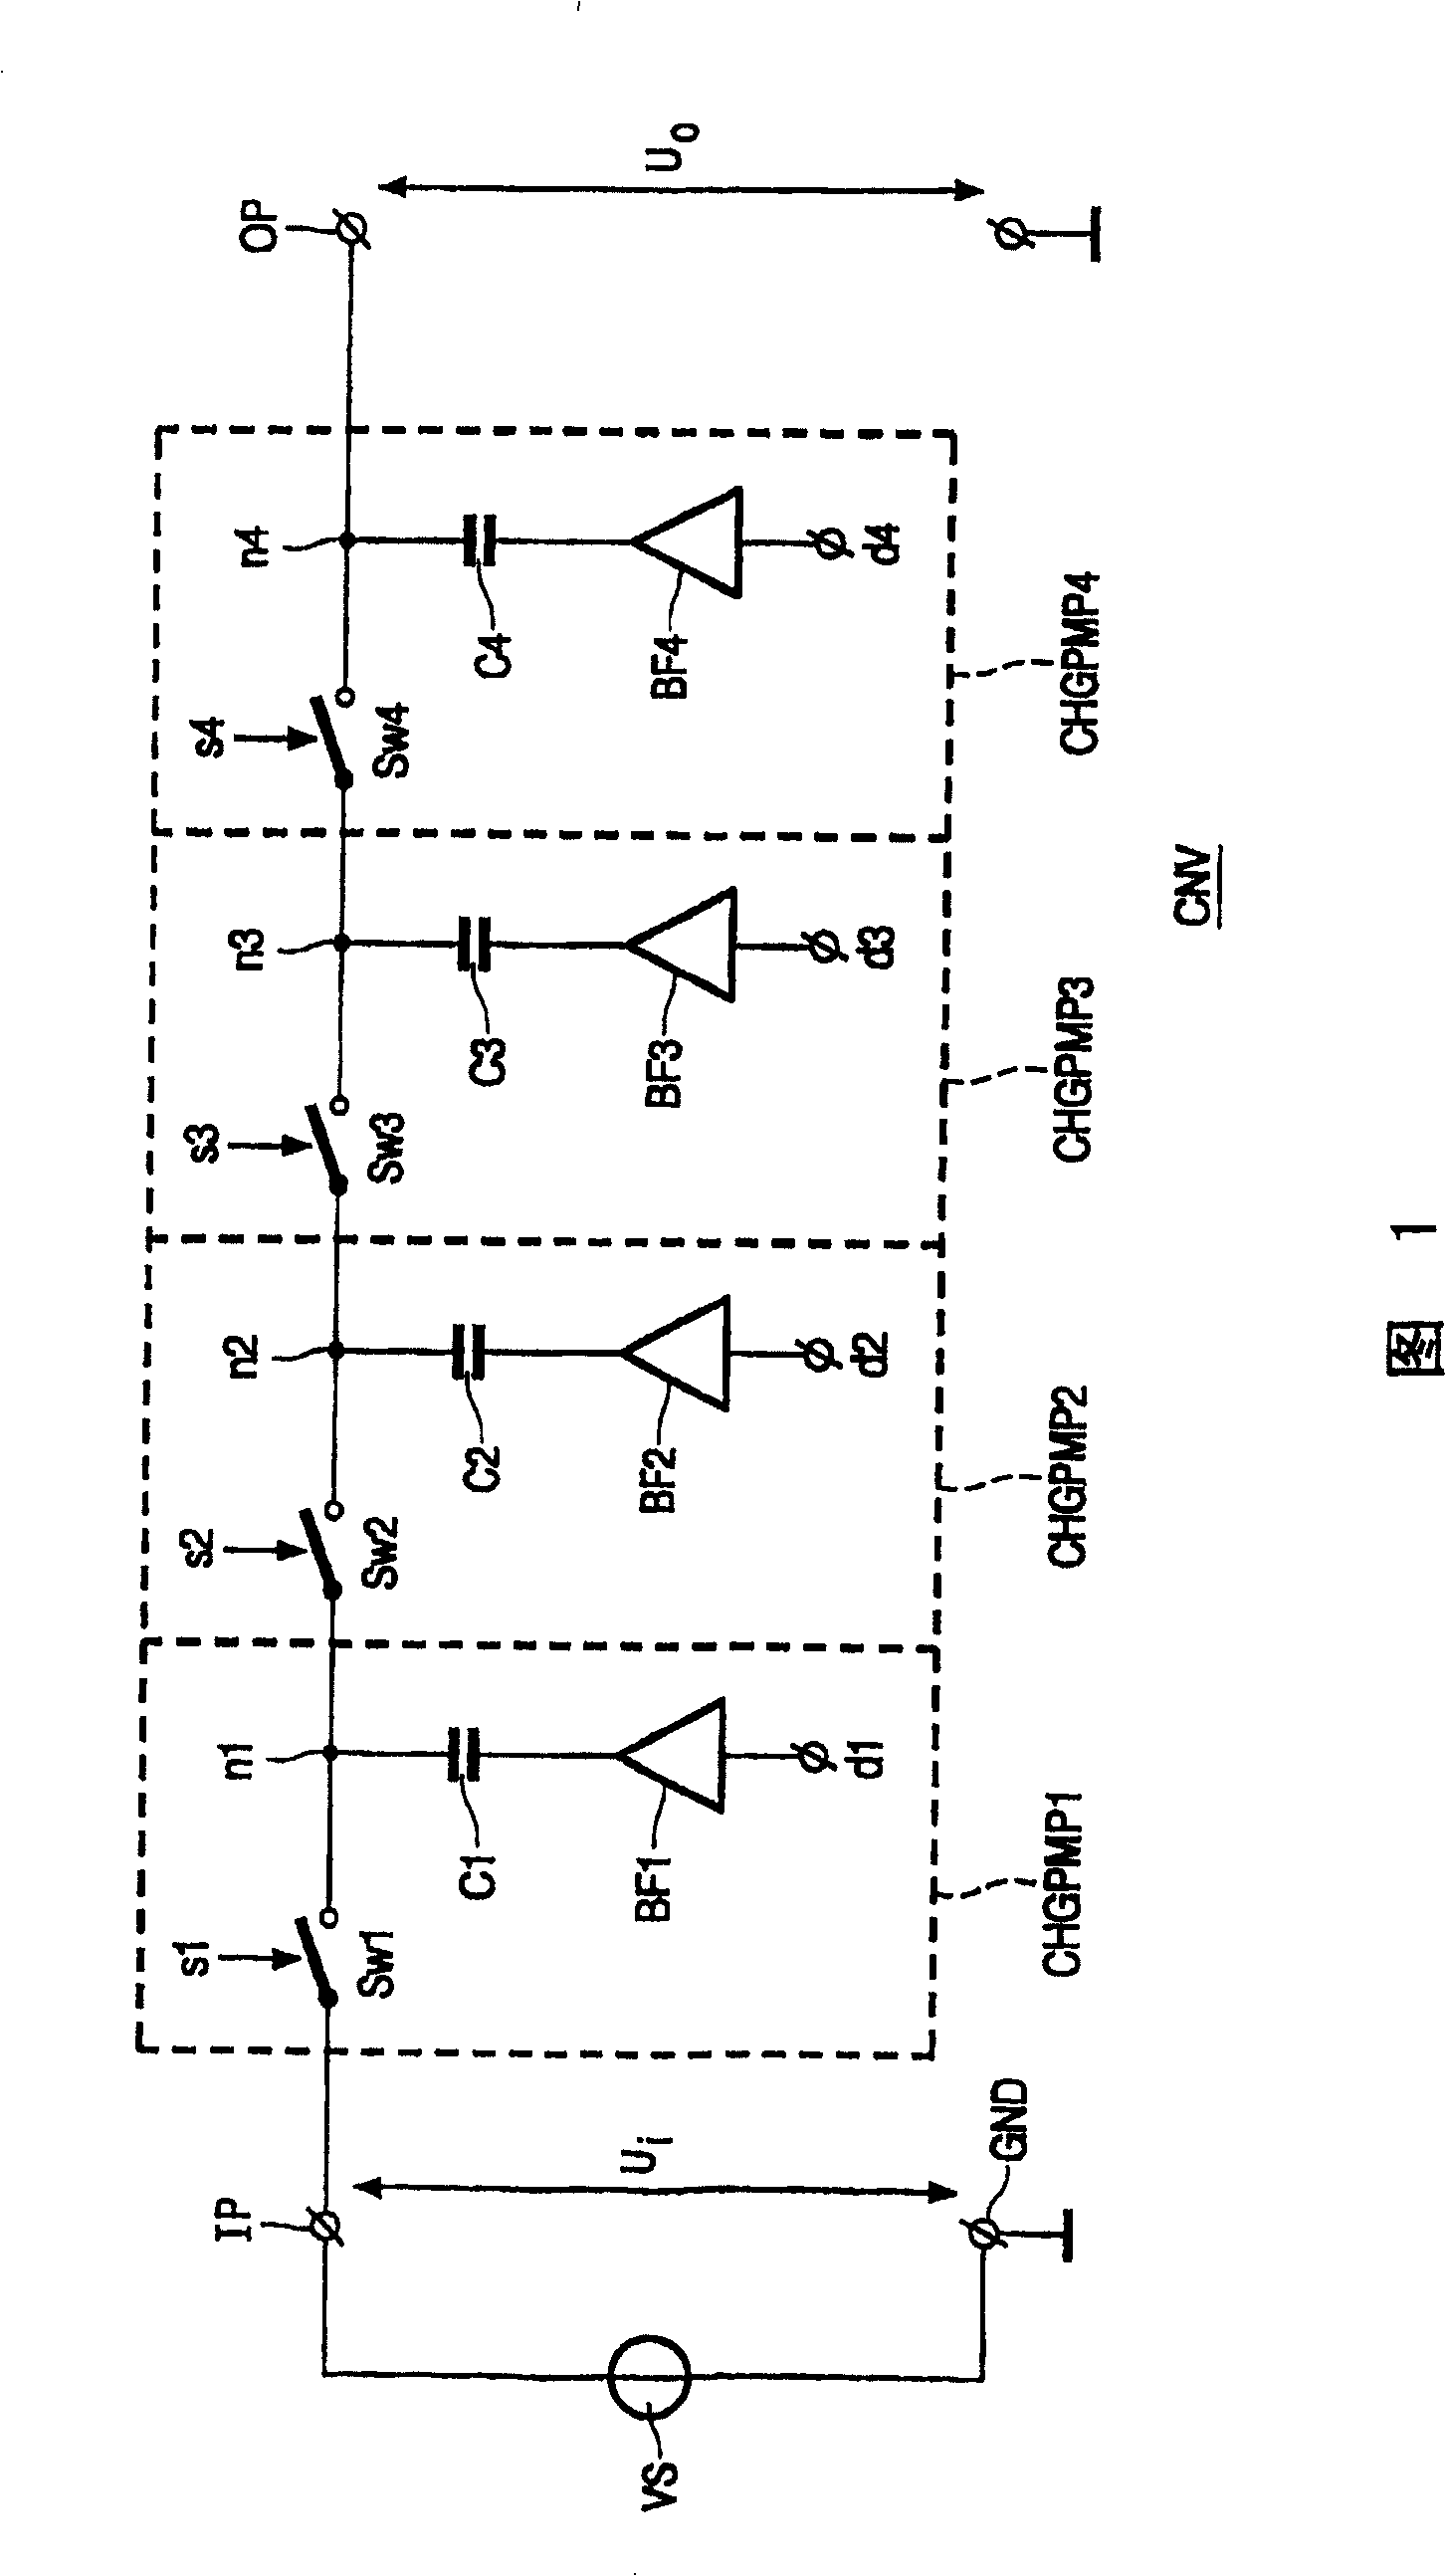 Medium for storing and reading information, and device for storing and reading of information on and from the medium